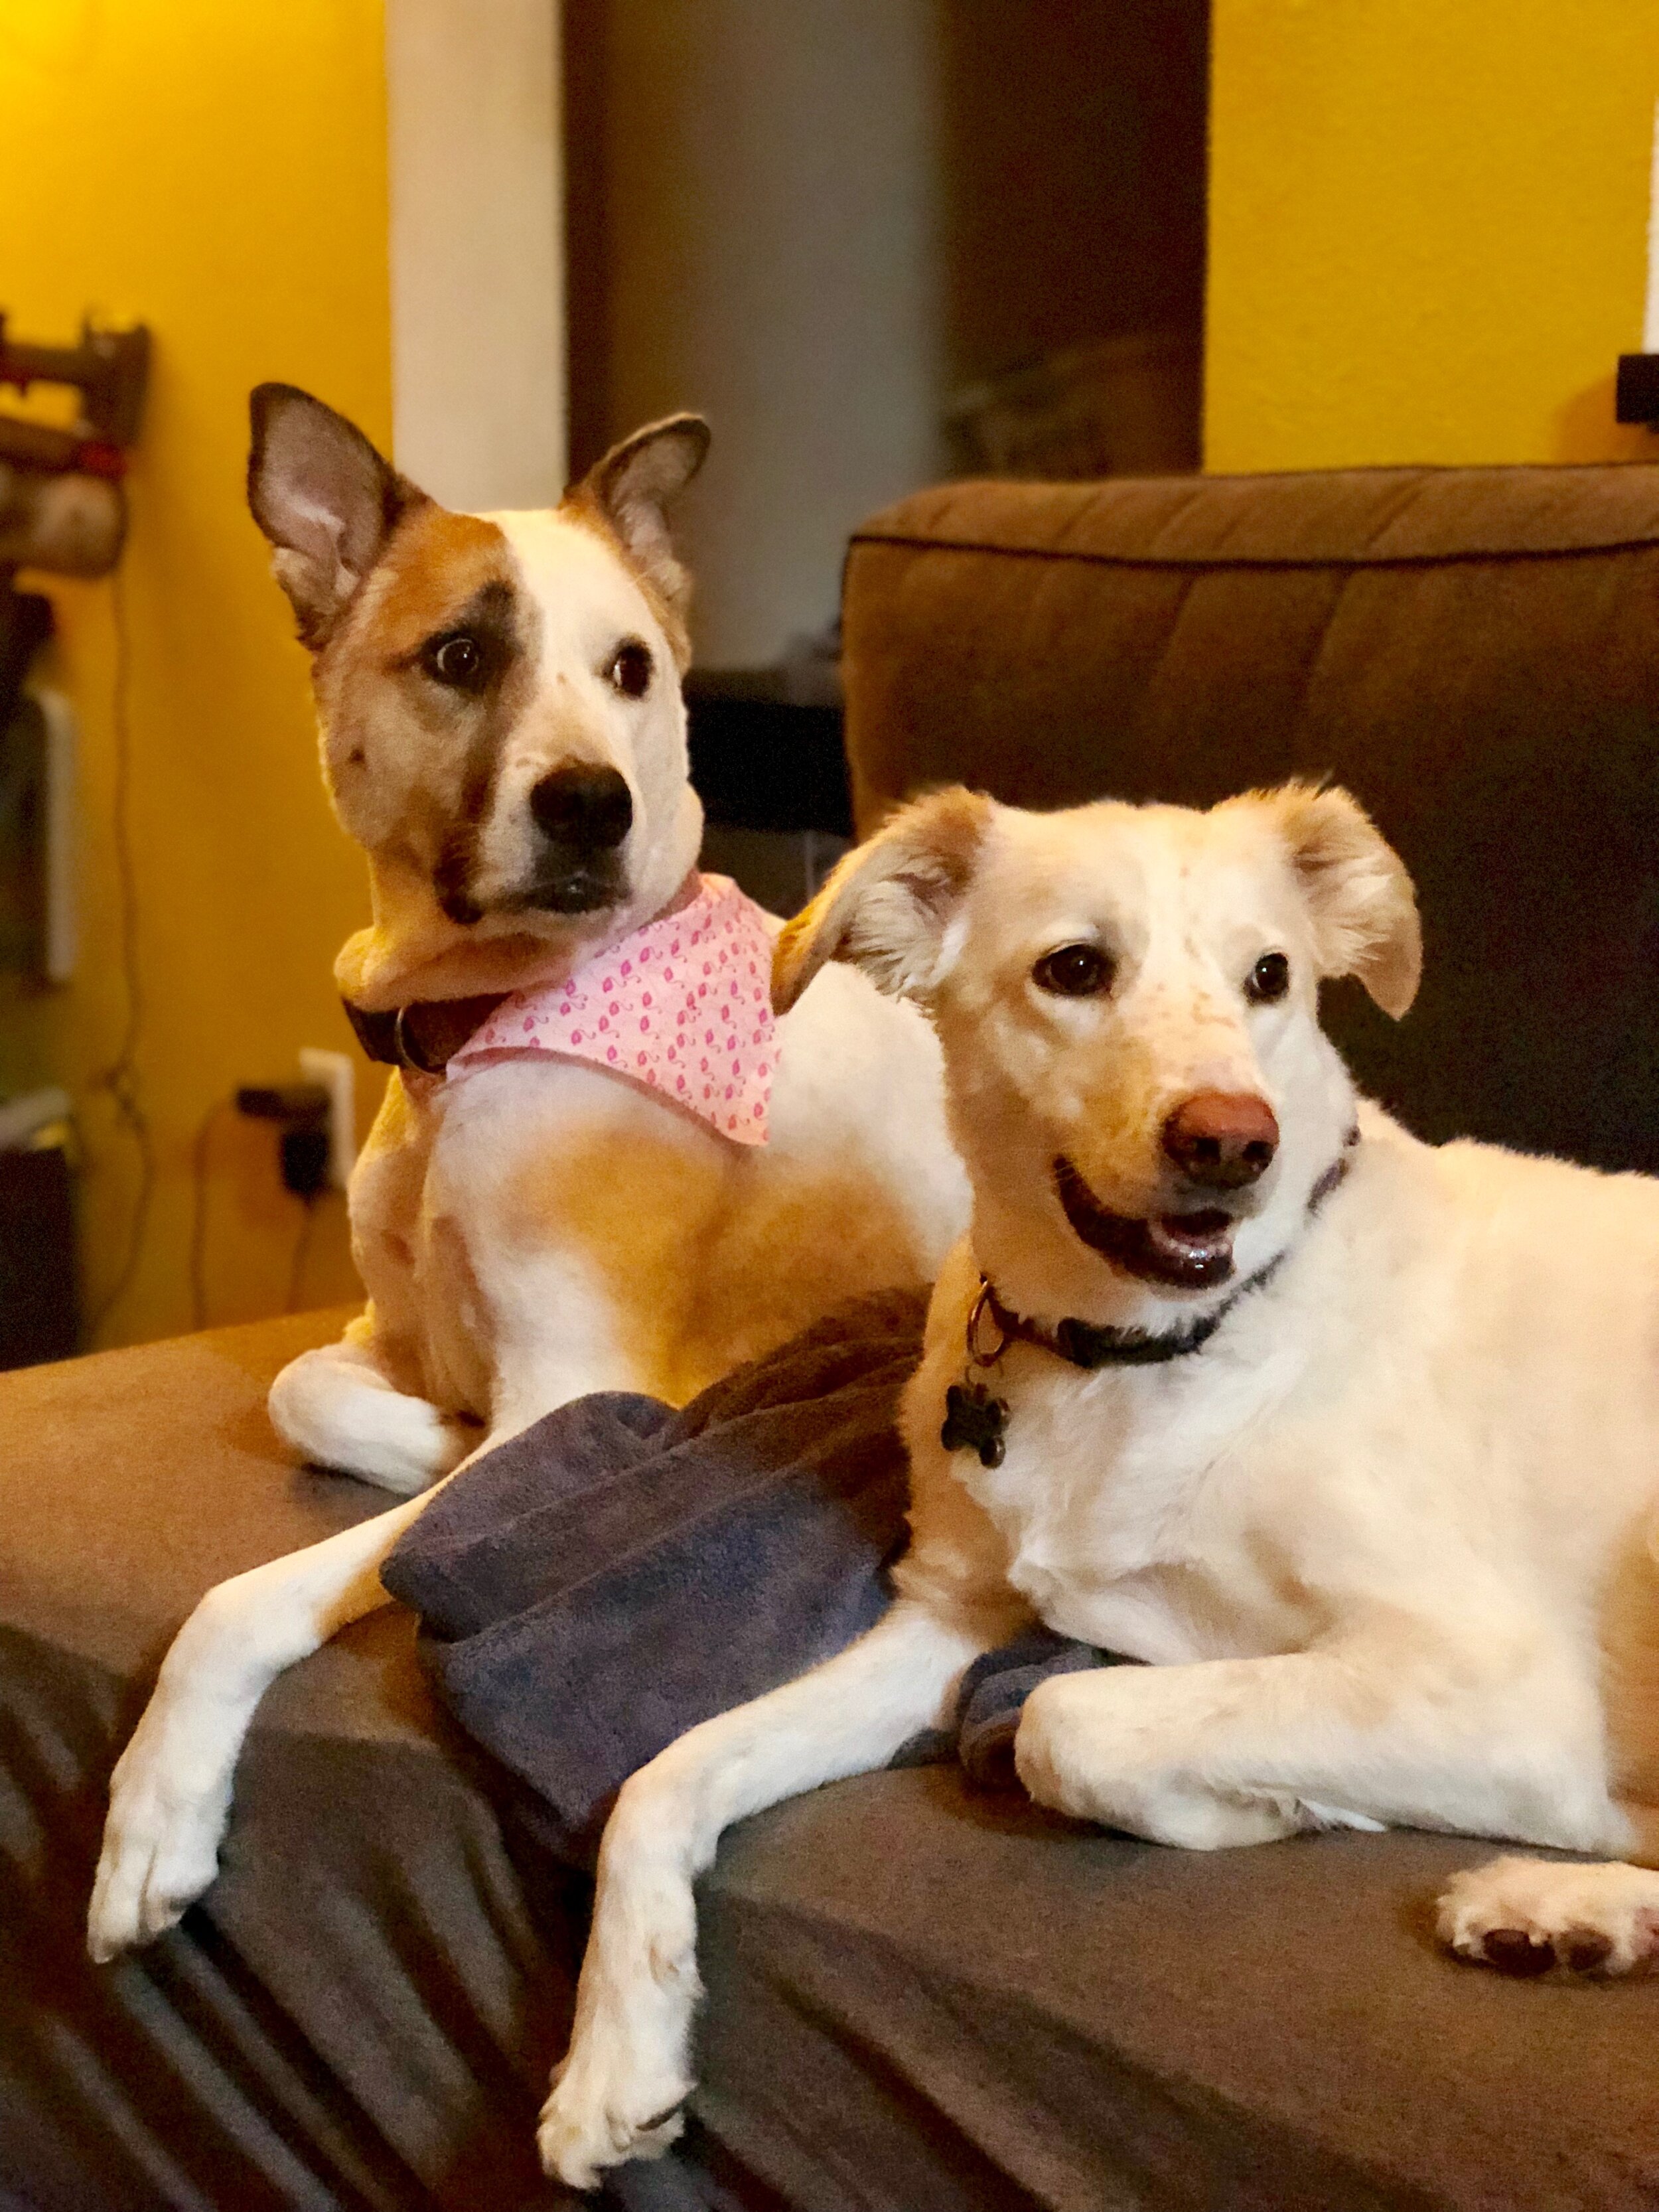 Lulu's Dogs, Norah and London, get transported to her autumn paradise in Burlington, Vermont to enjoy some cuddles, thanks to Citizen Shipper